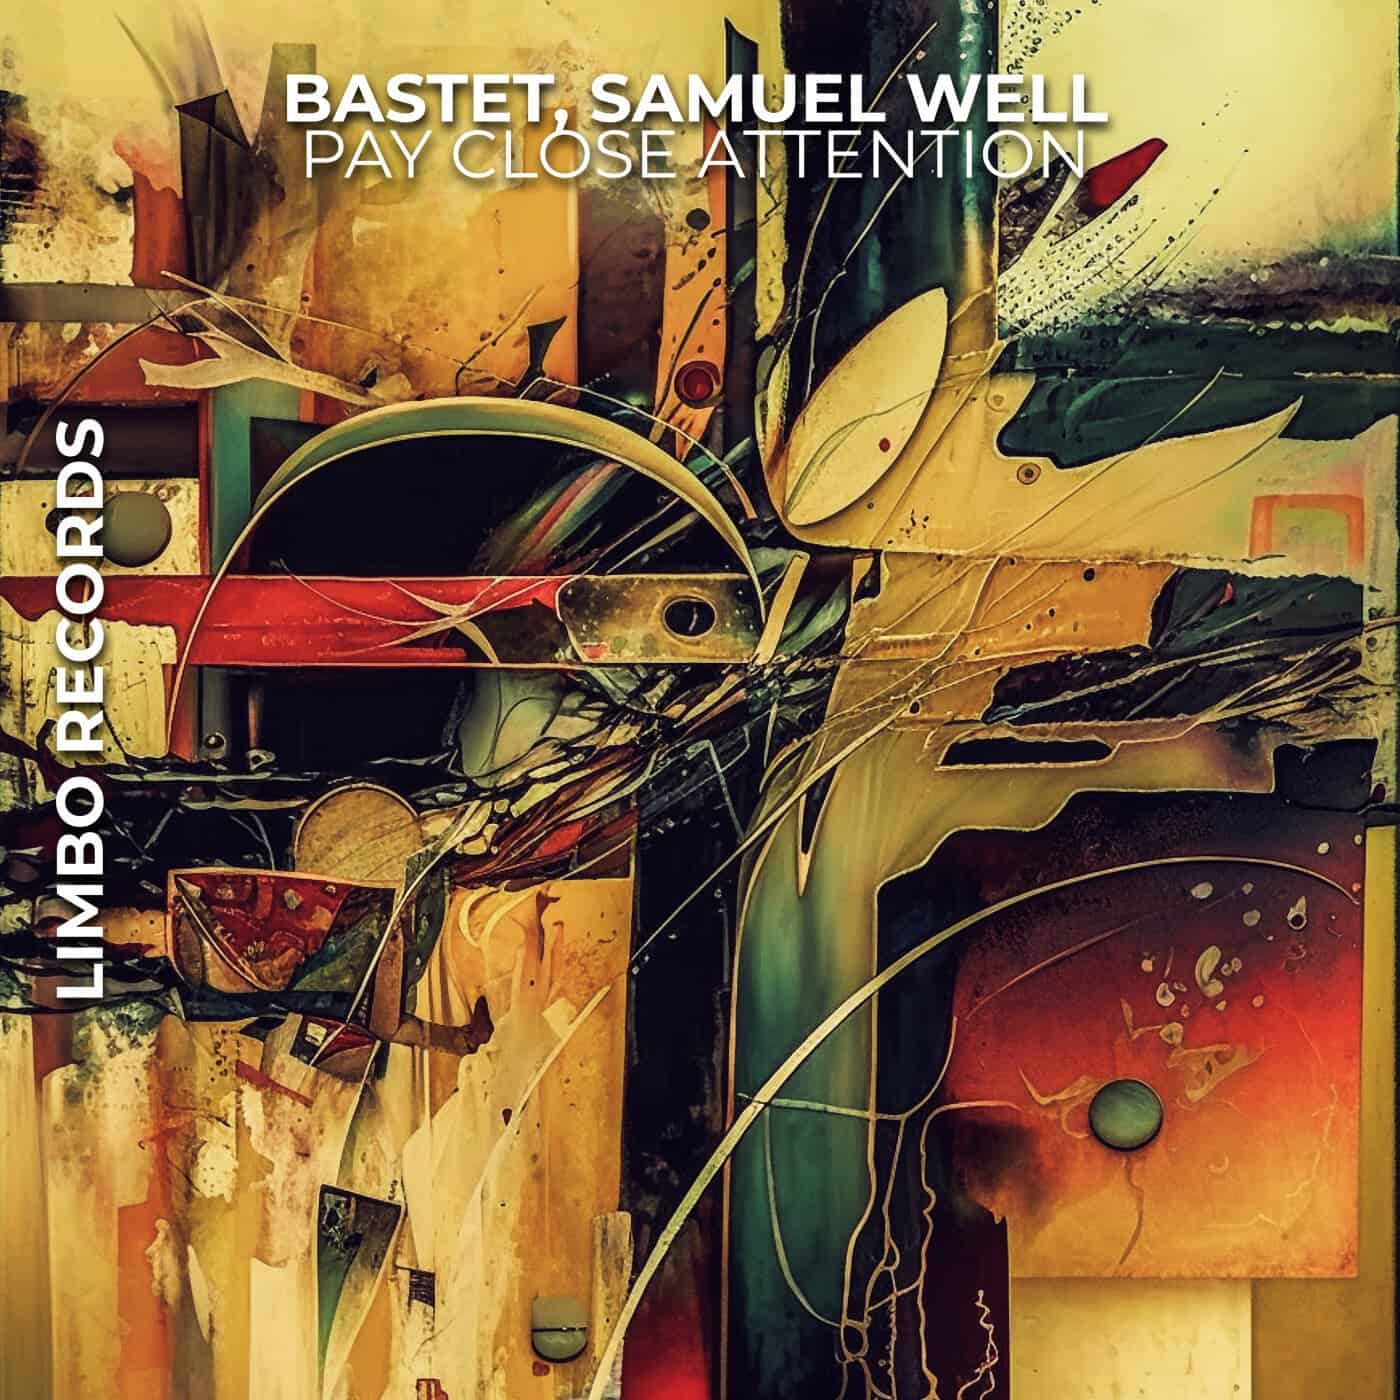 Download Bastet, Samuel Well - Pay Close Attention on Electrobuzz